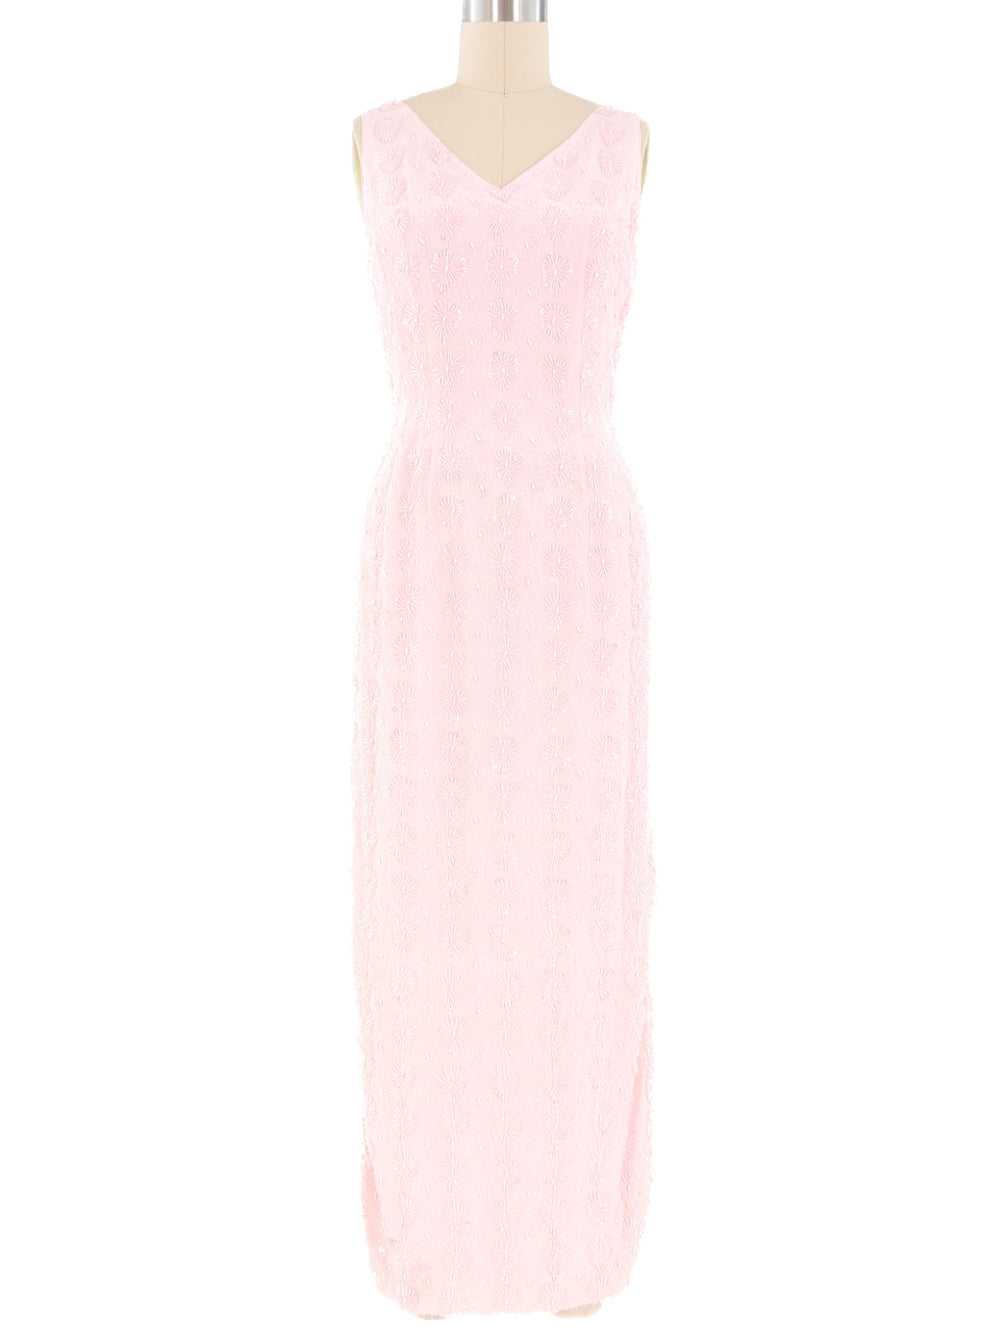 1960s Baby Pink Beaded Gown - Gem